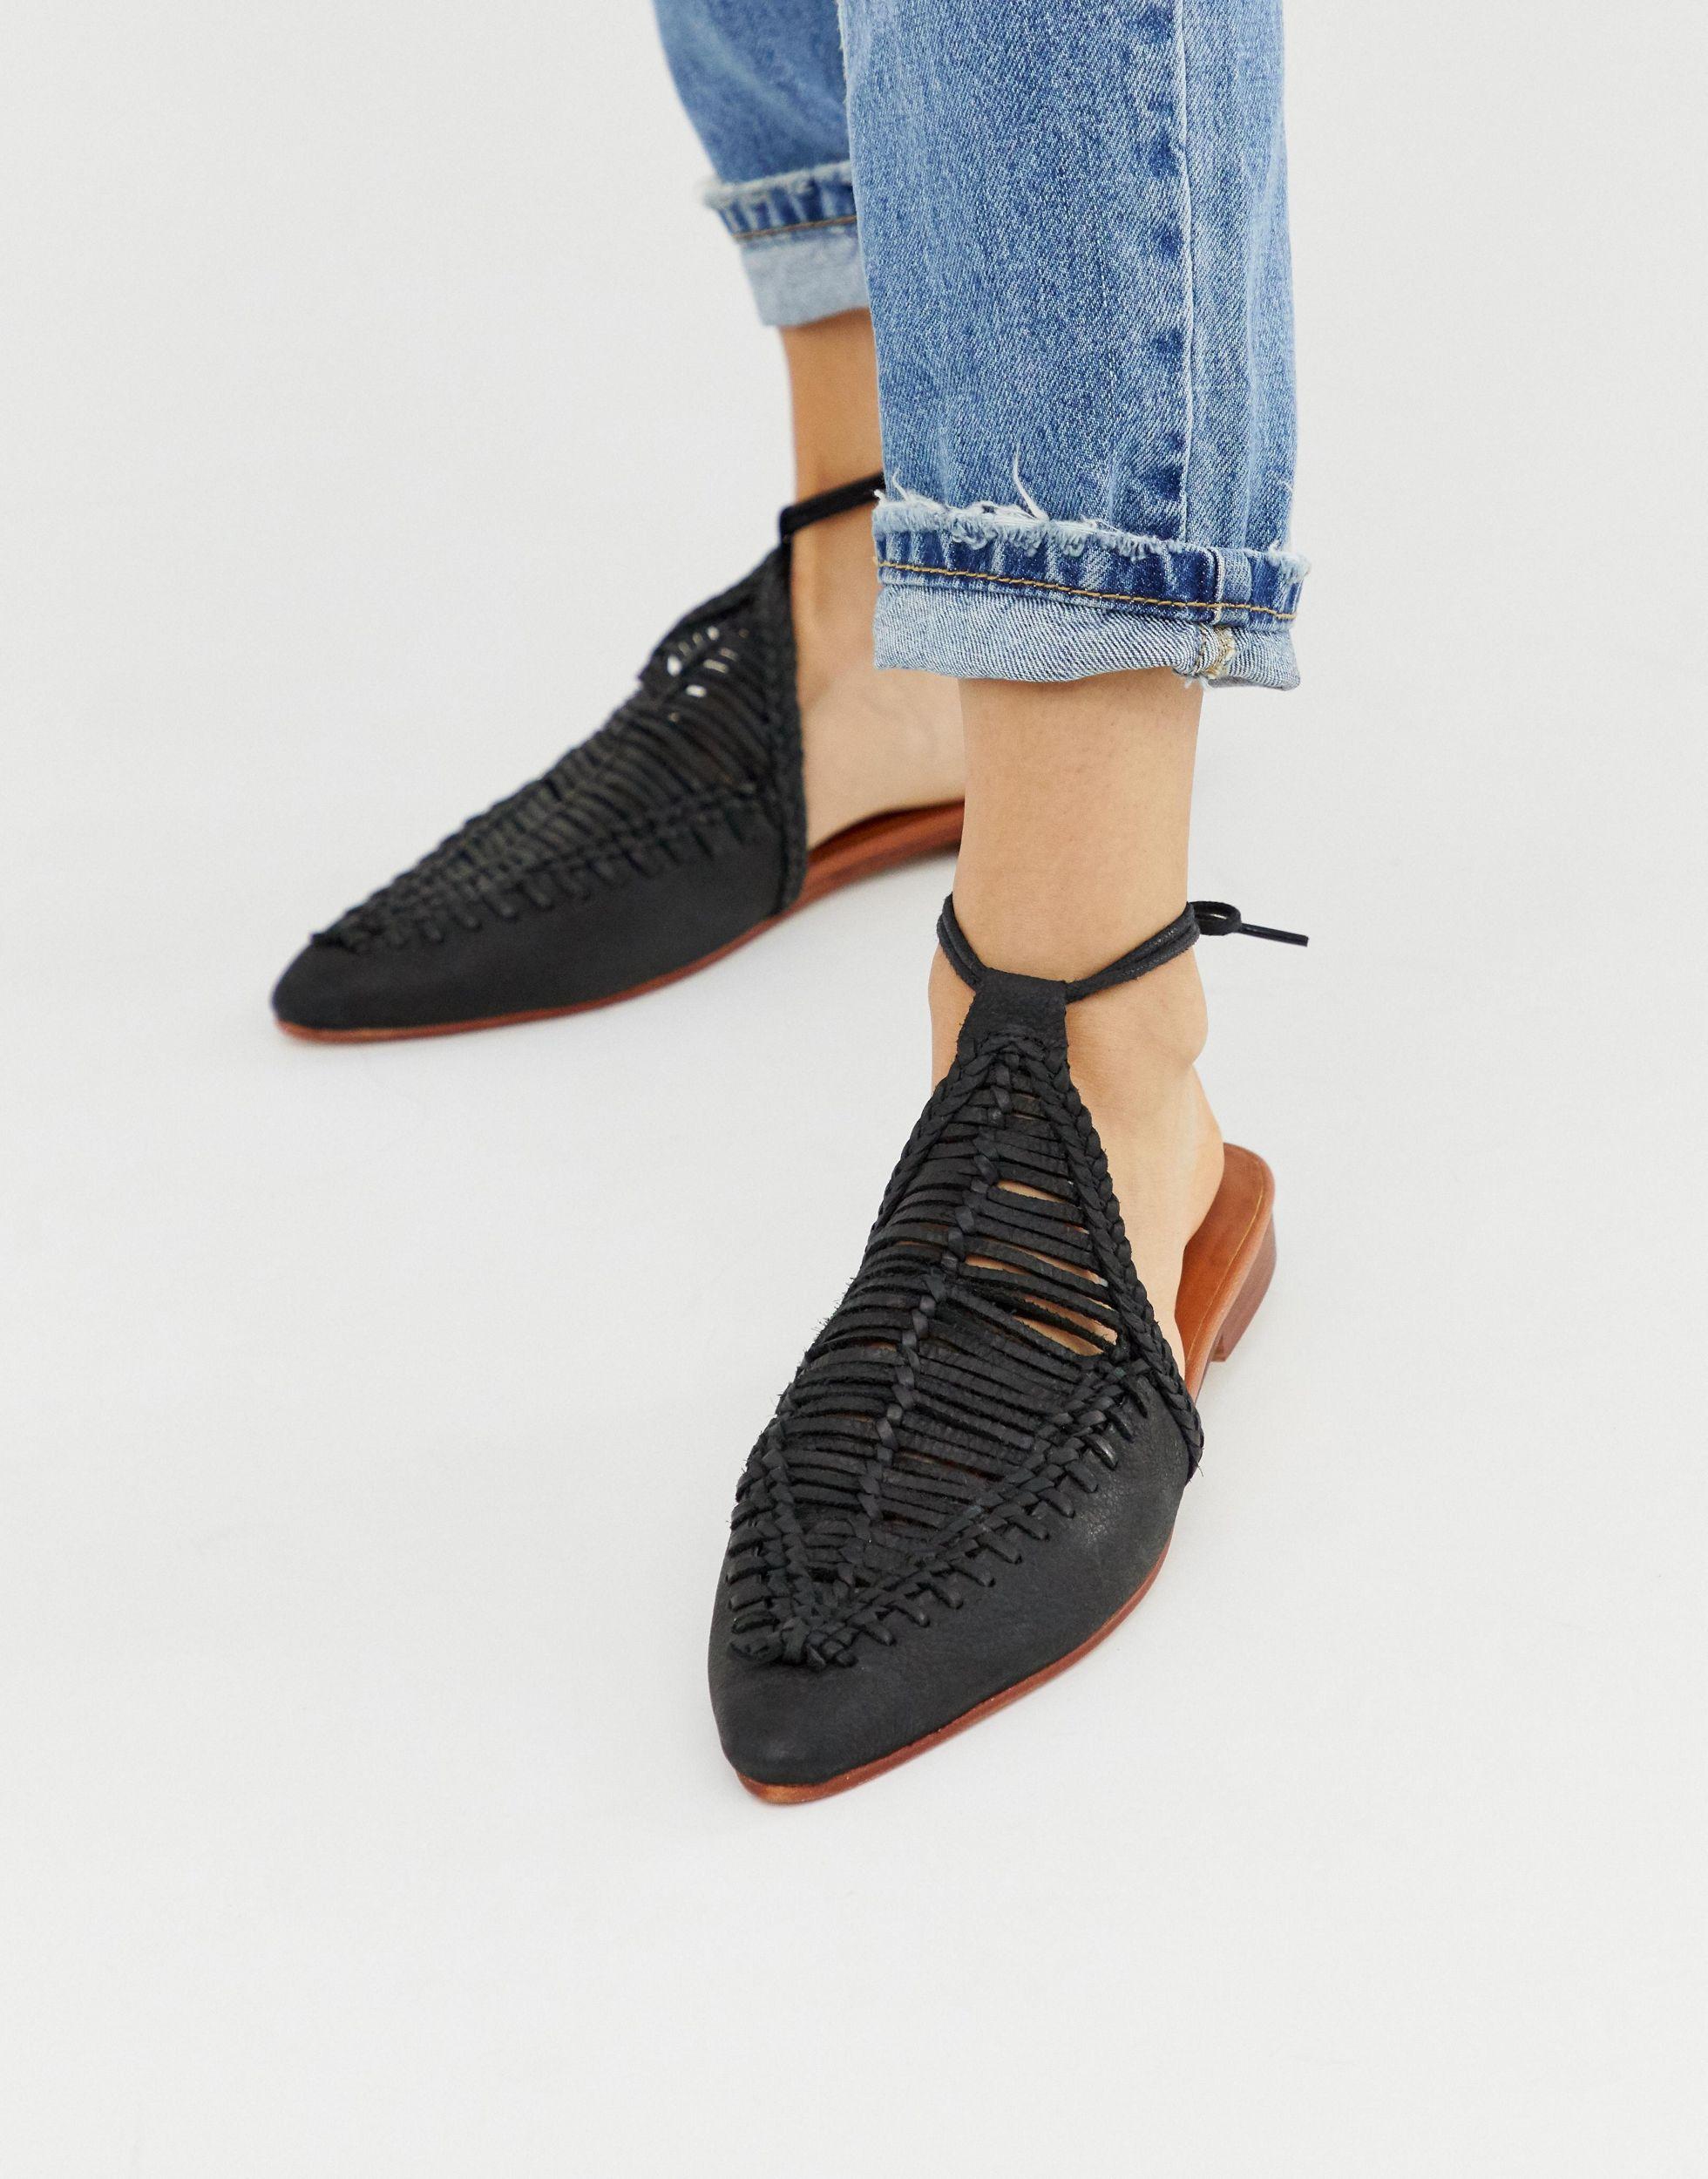 Free People Dana Leather Woven Flat Mules With Ankle Ties in Black | Lyst